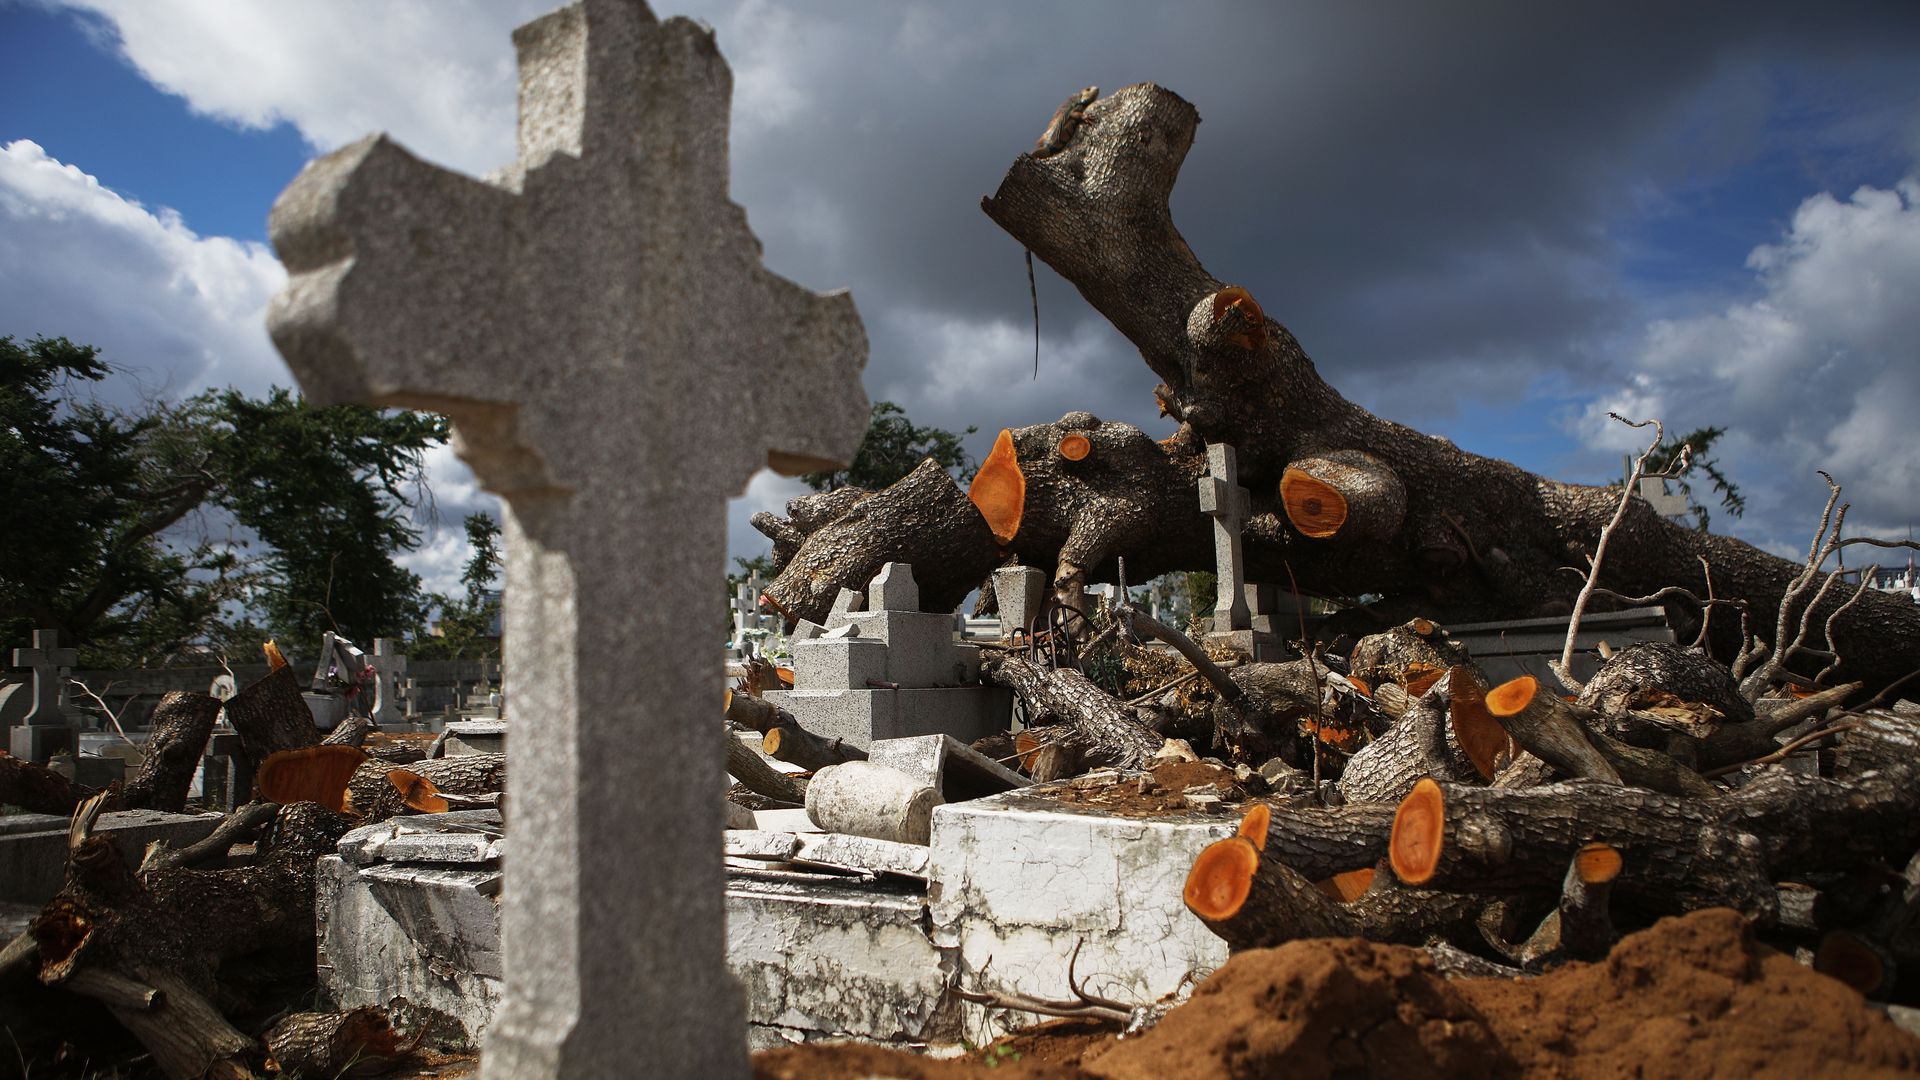 A tree toppled by Hurricane Maria lays next to a grave.